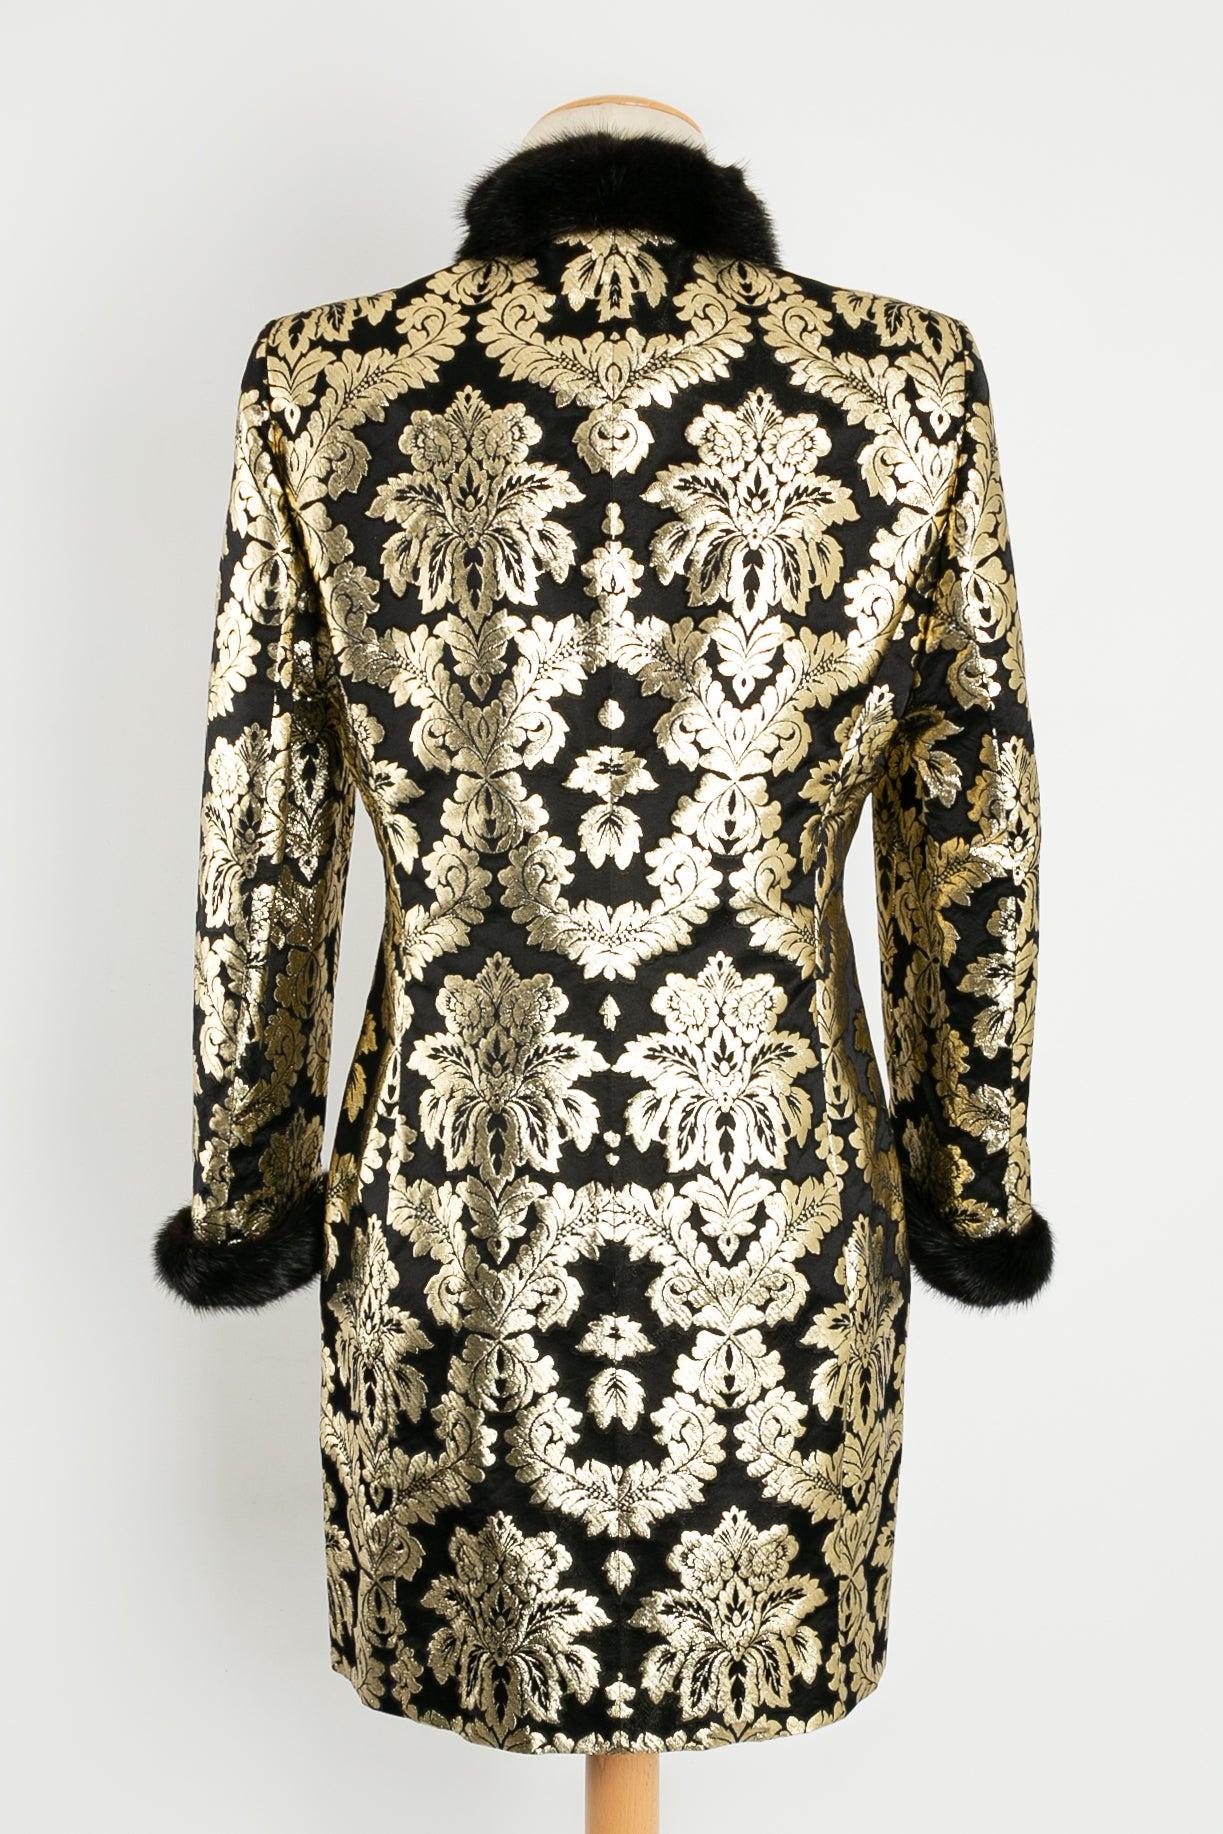 Women's Louis Féraud Evening Silk Coat in Black and Gold, Size 36FR